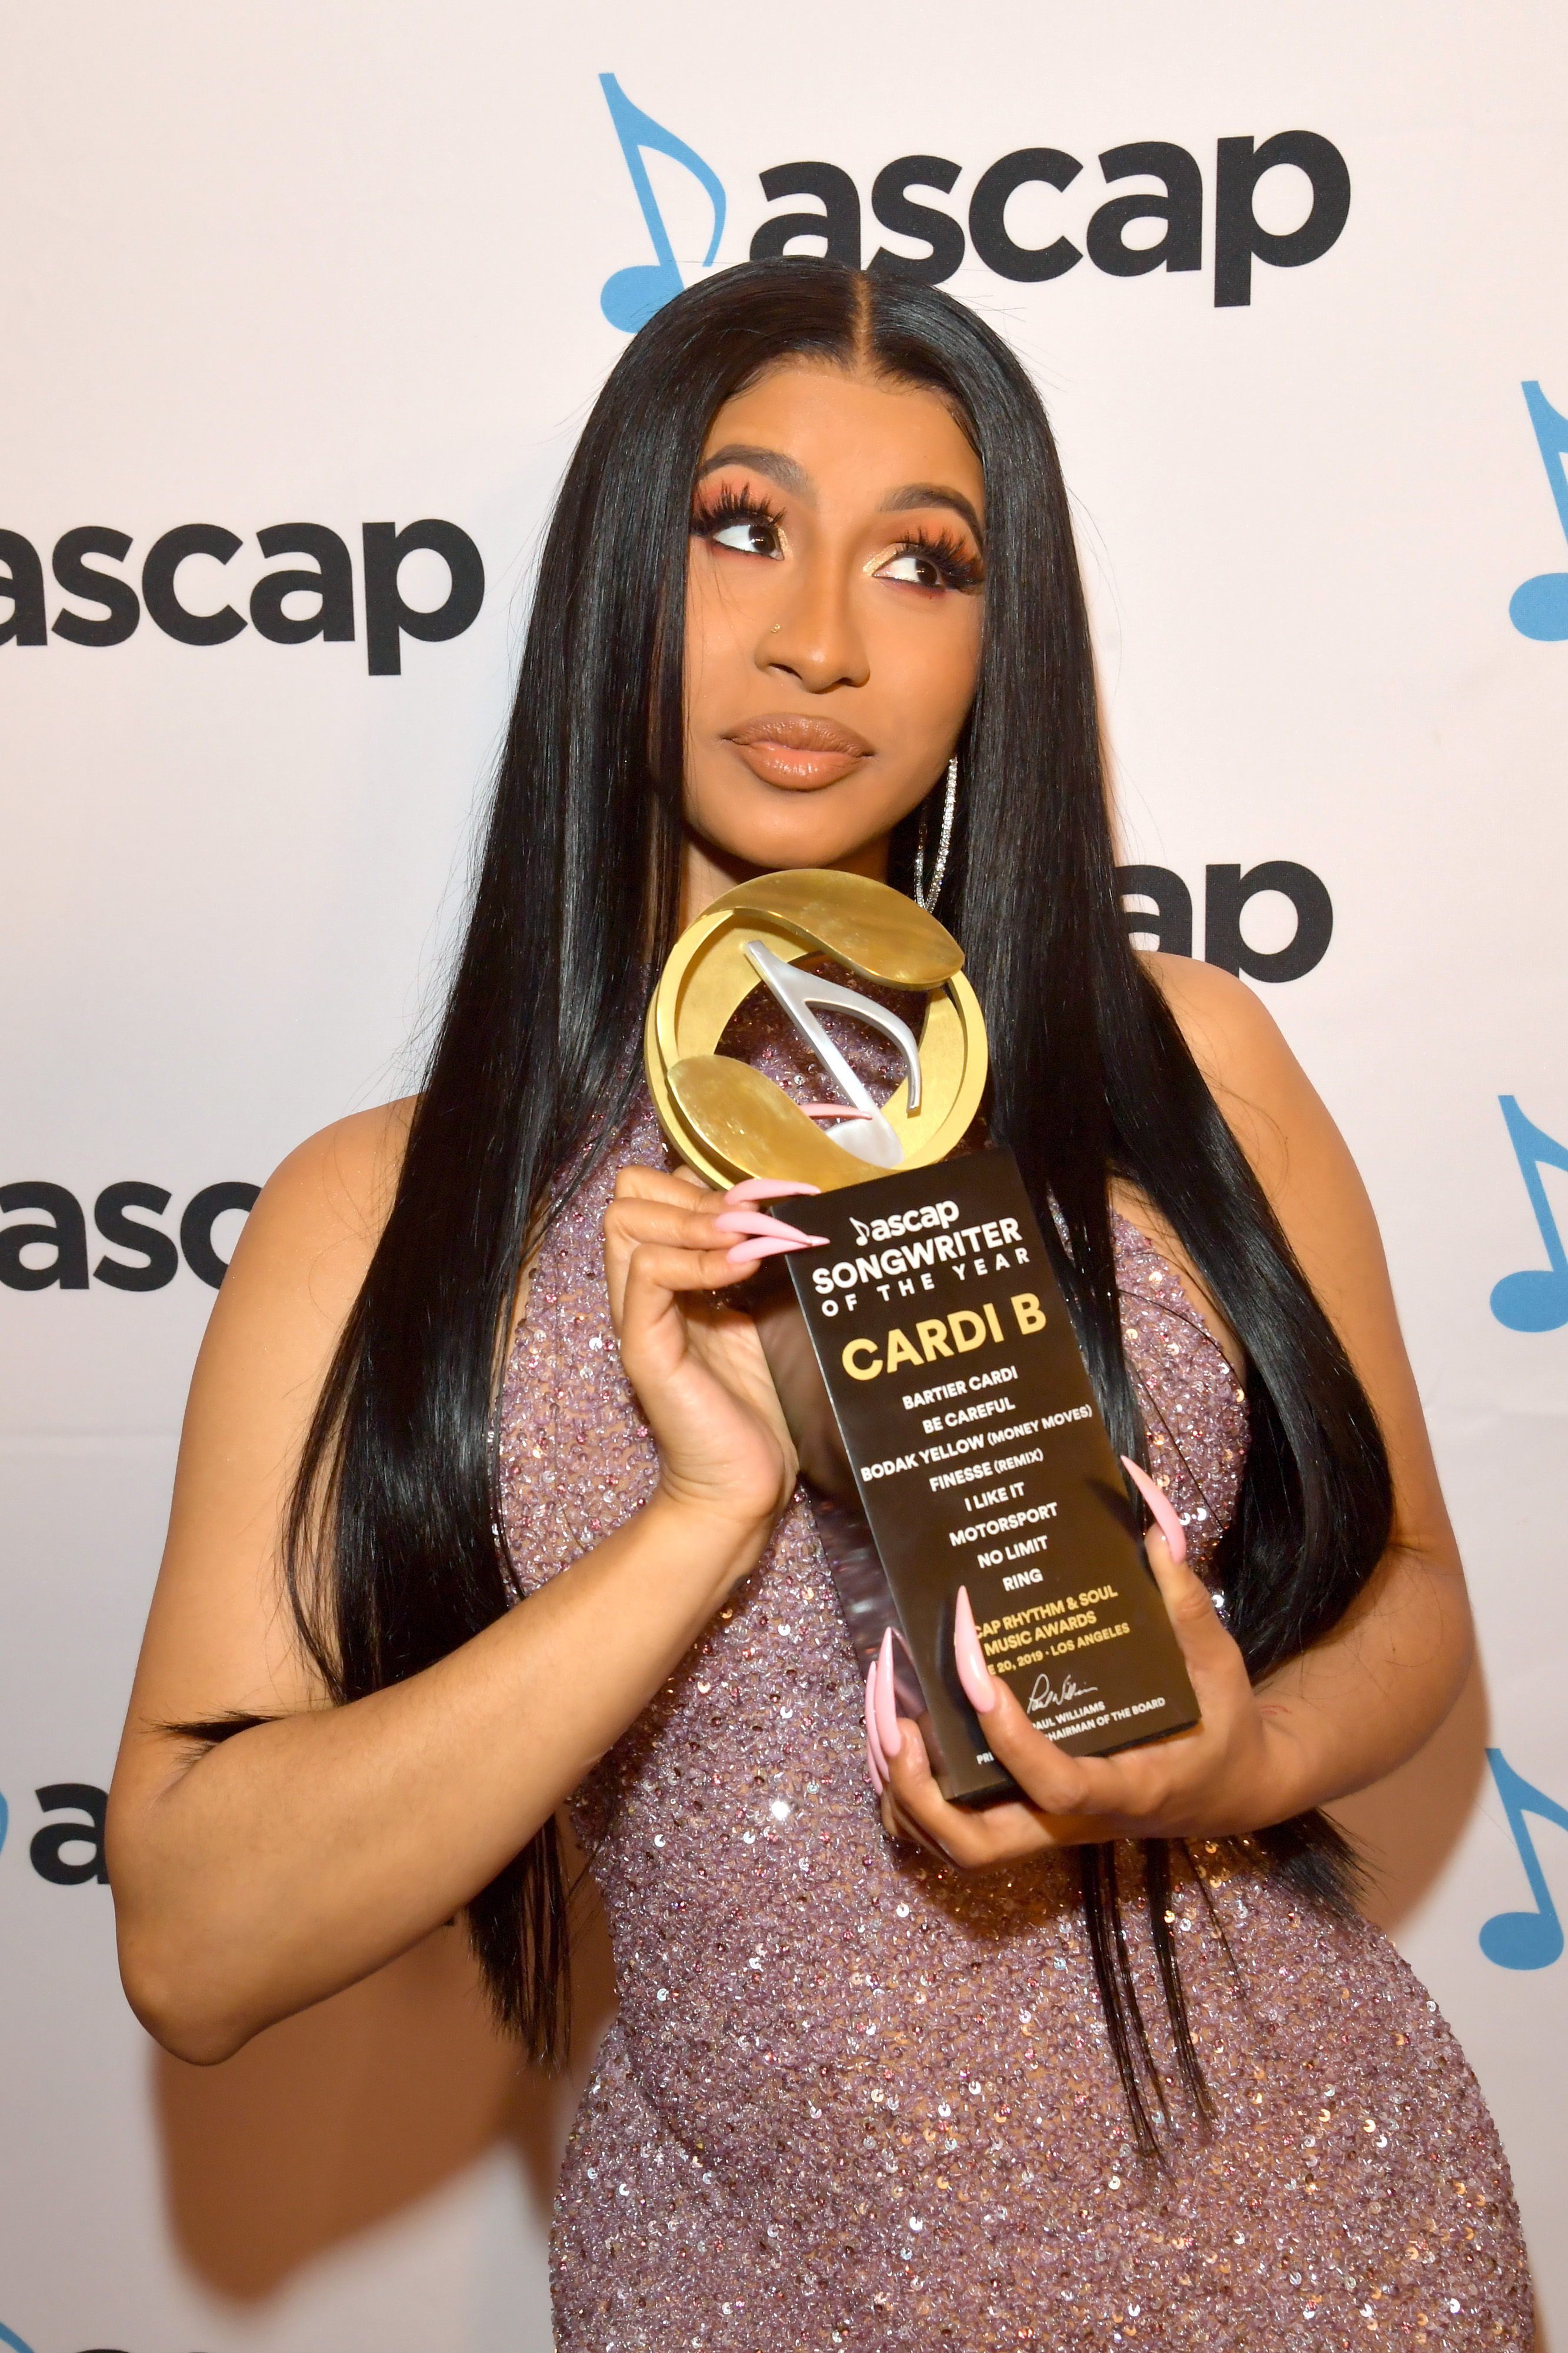 Cardi B Named ASCAP Songwriter Of The Year